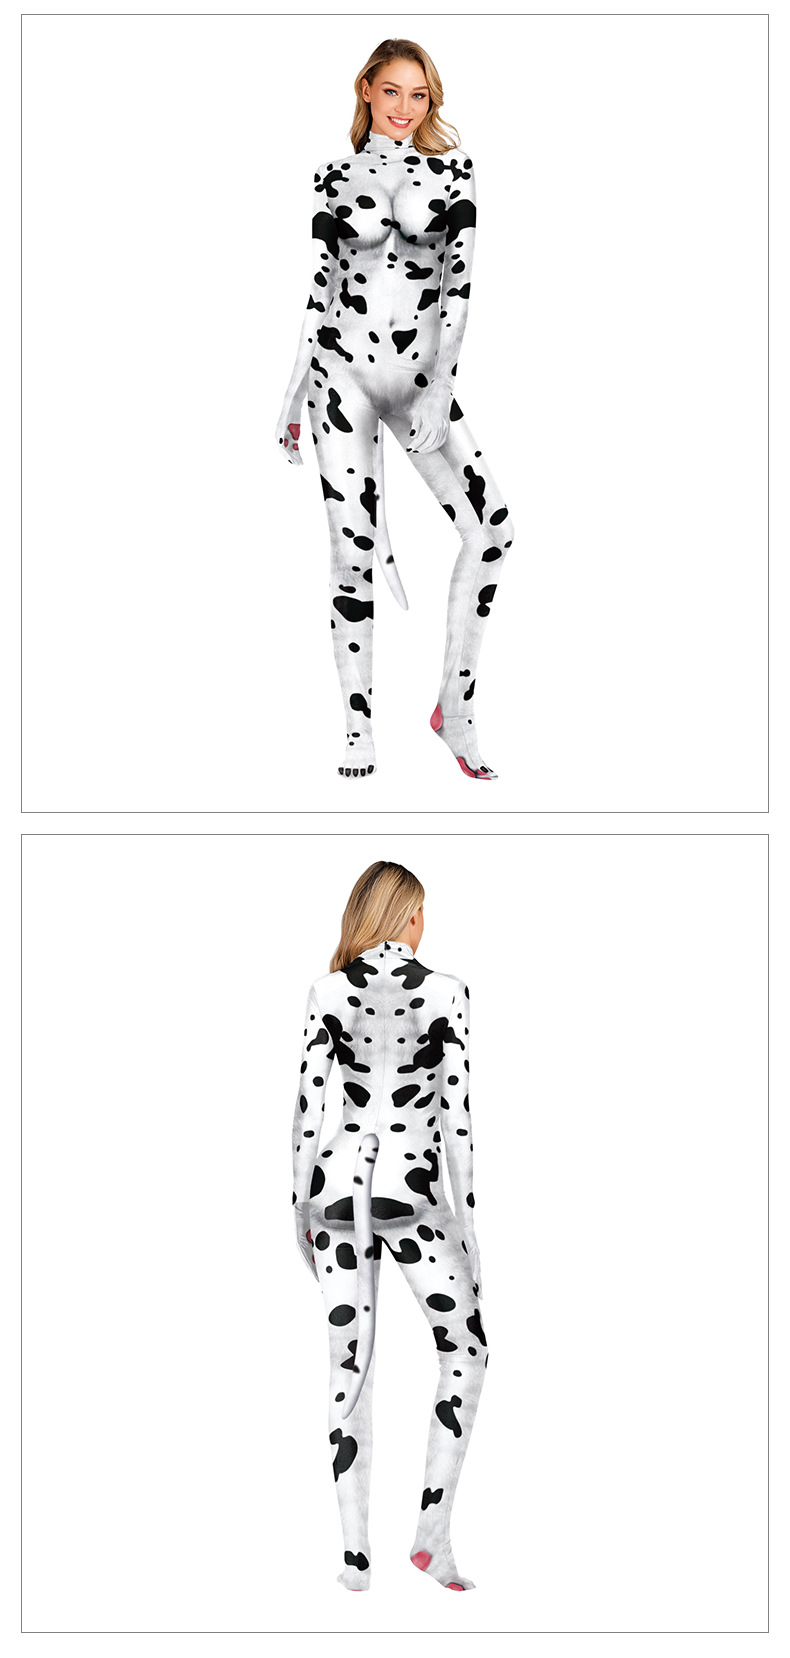 cool sexy women's milk cow 3d print catsuit with tail for halloween cosplay